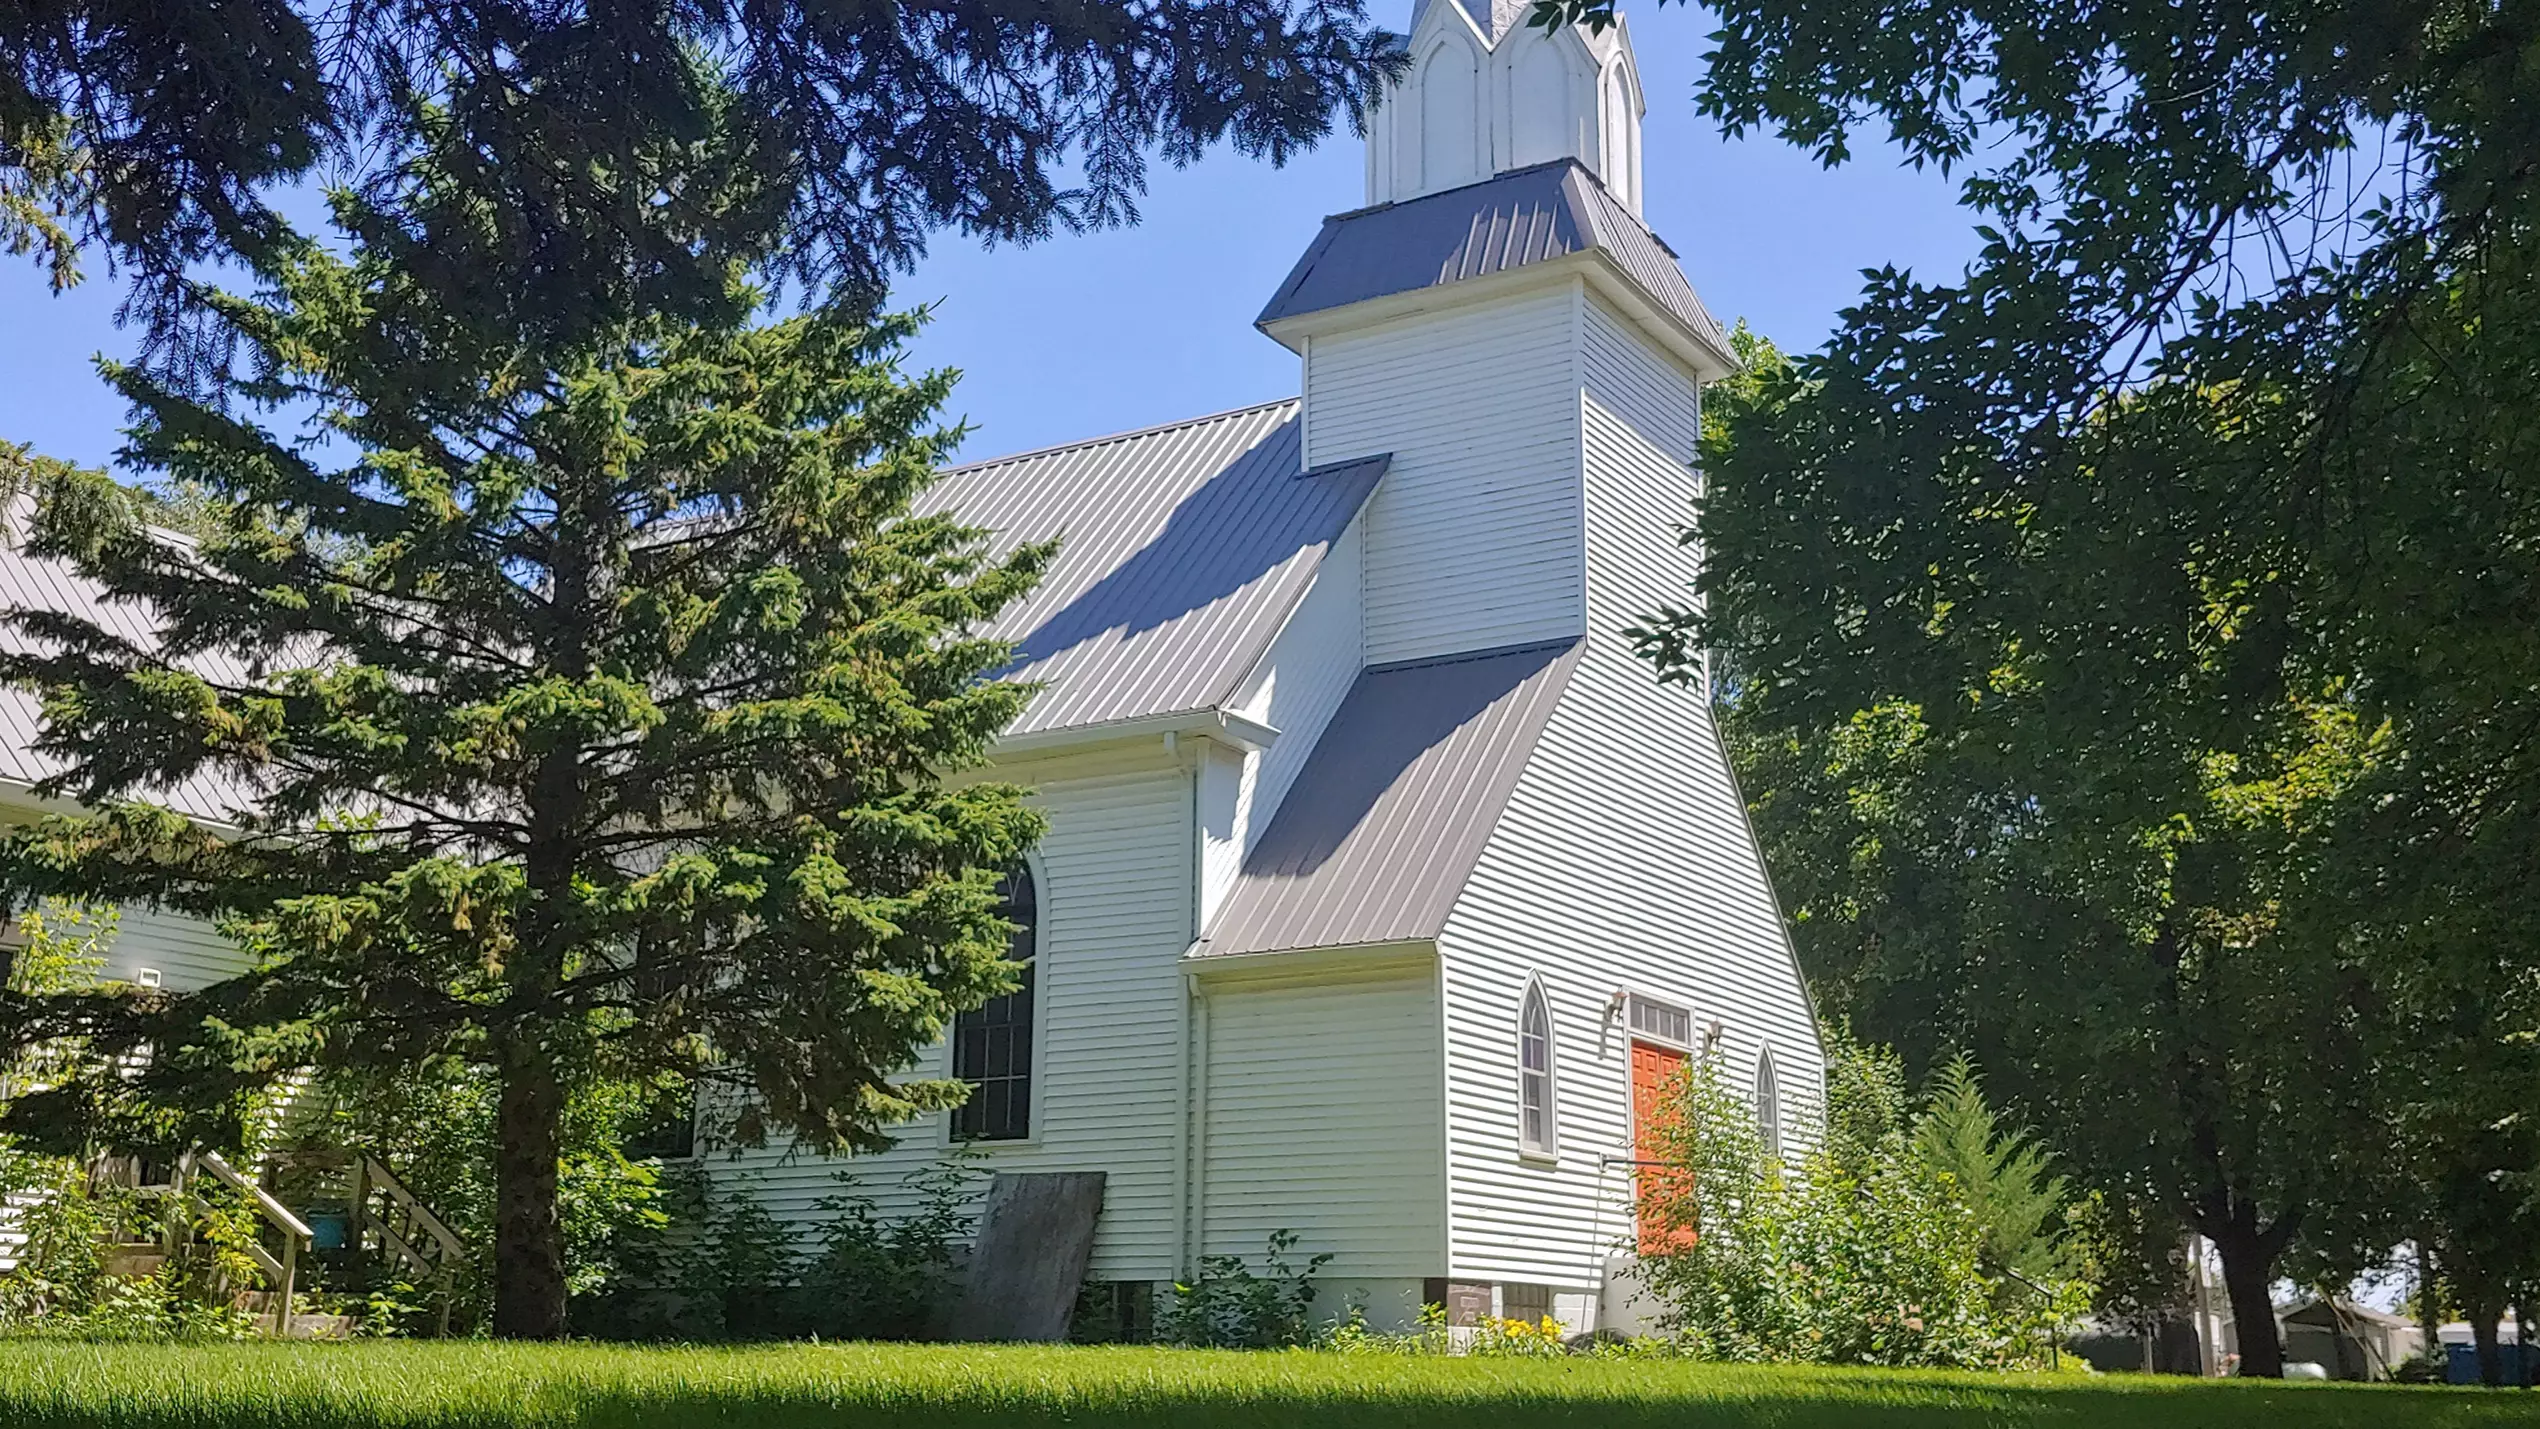 American Town Sparks Outcry By Approving ‘Whites-Only’ Church